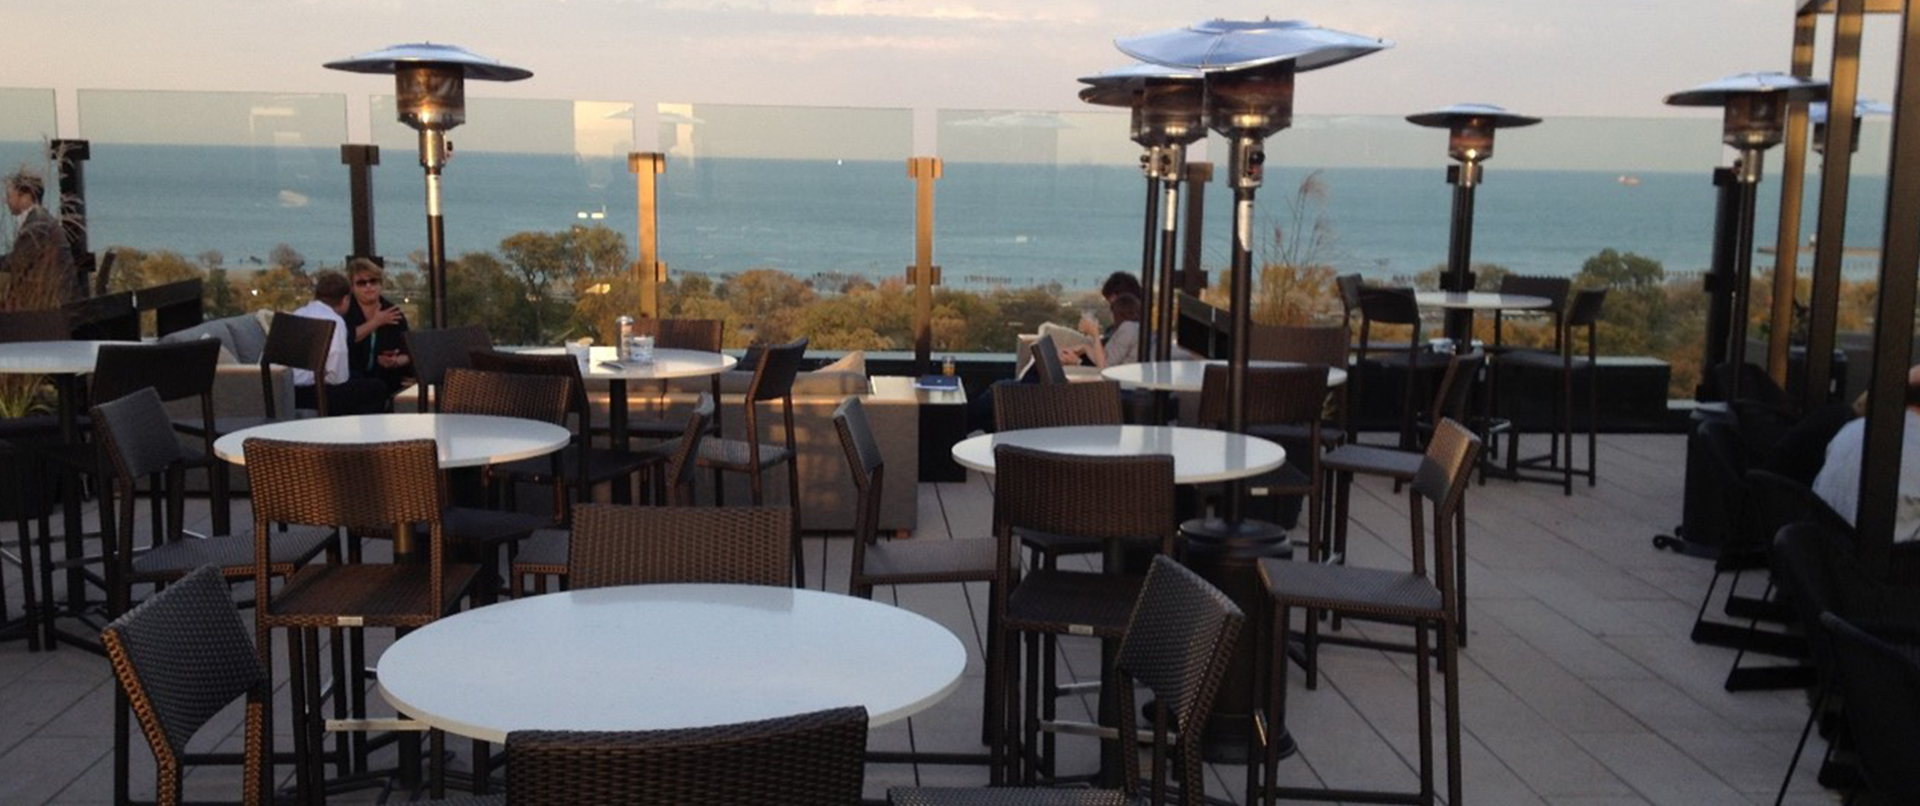 Rooftop Seating with View of Lake Michigan